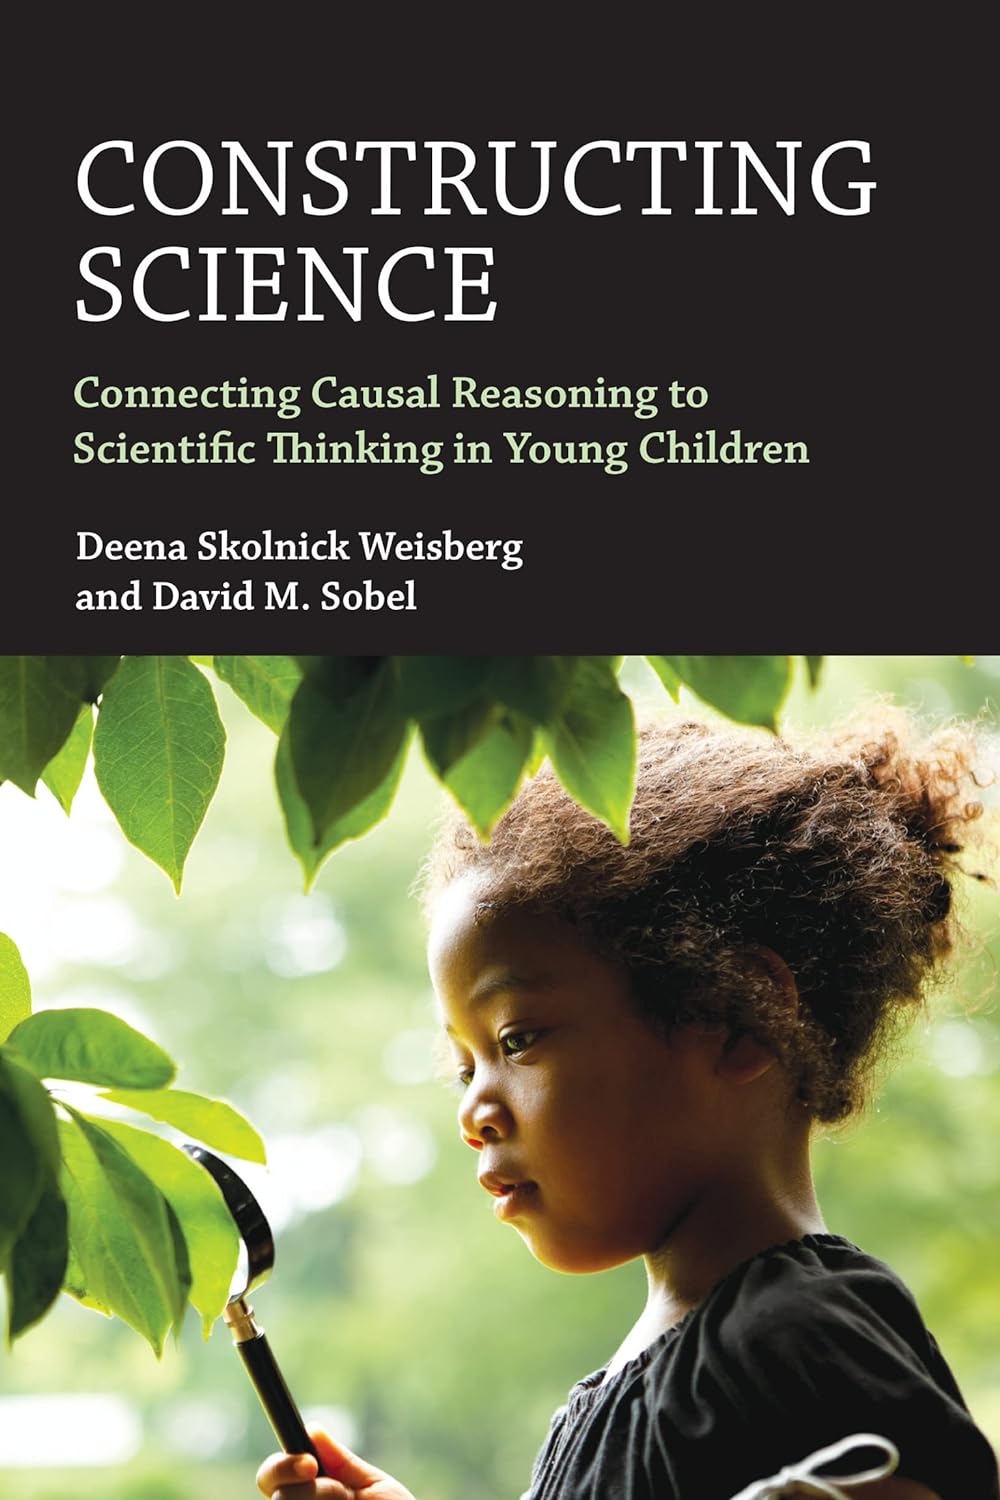 Constructing Science: Connecting Causal Reasoning to Scientific Thinking in Young Children by Deena Skolnick Weisberg 